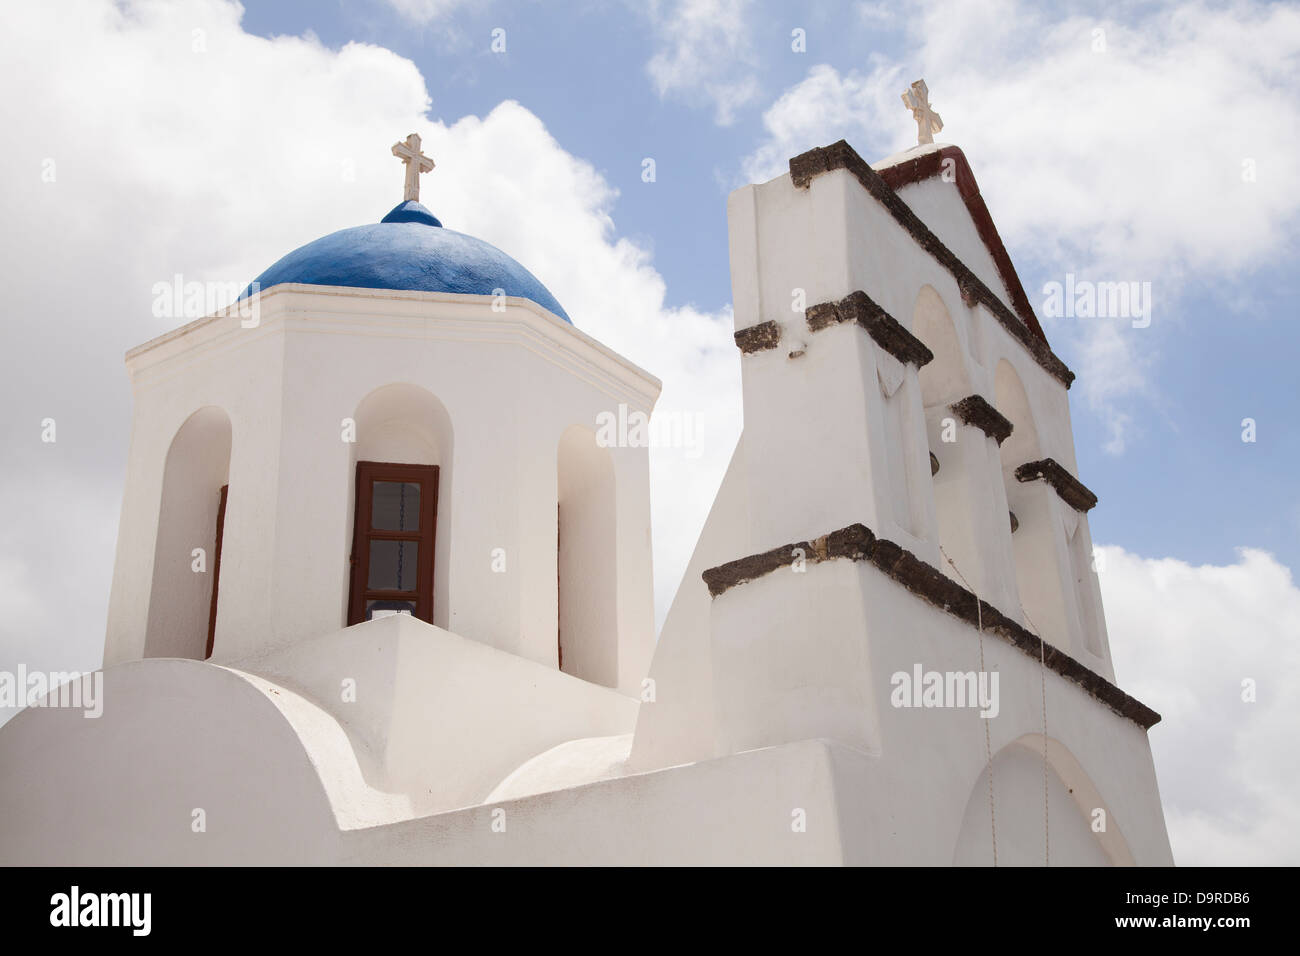 A cycladic blue dome tops a church in the hilltop town of Pyrgos on the island of Santorini in Greece. Stock Photo